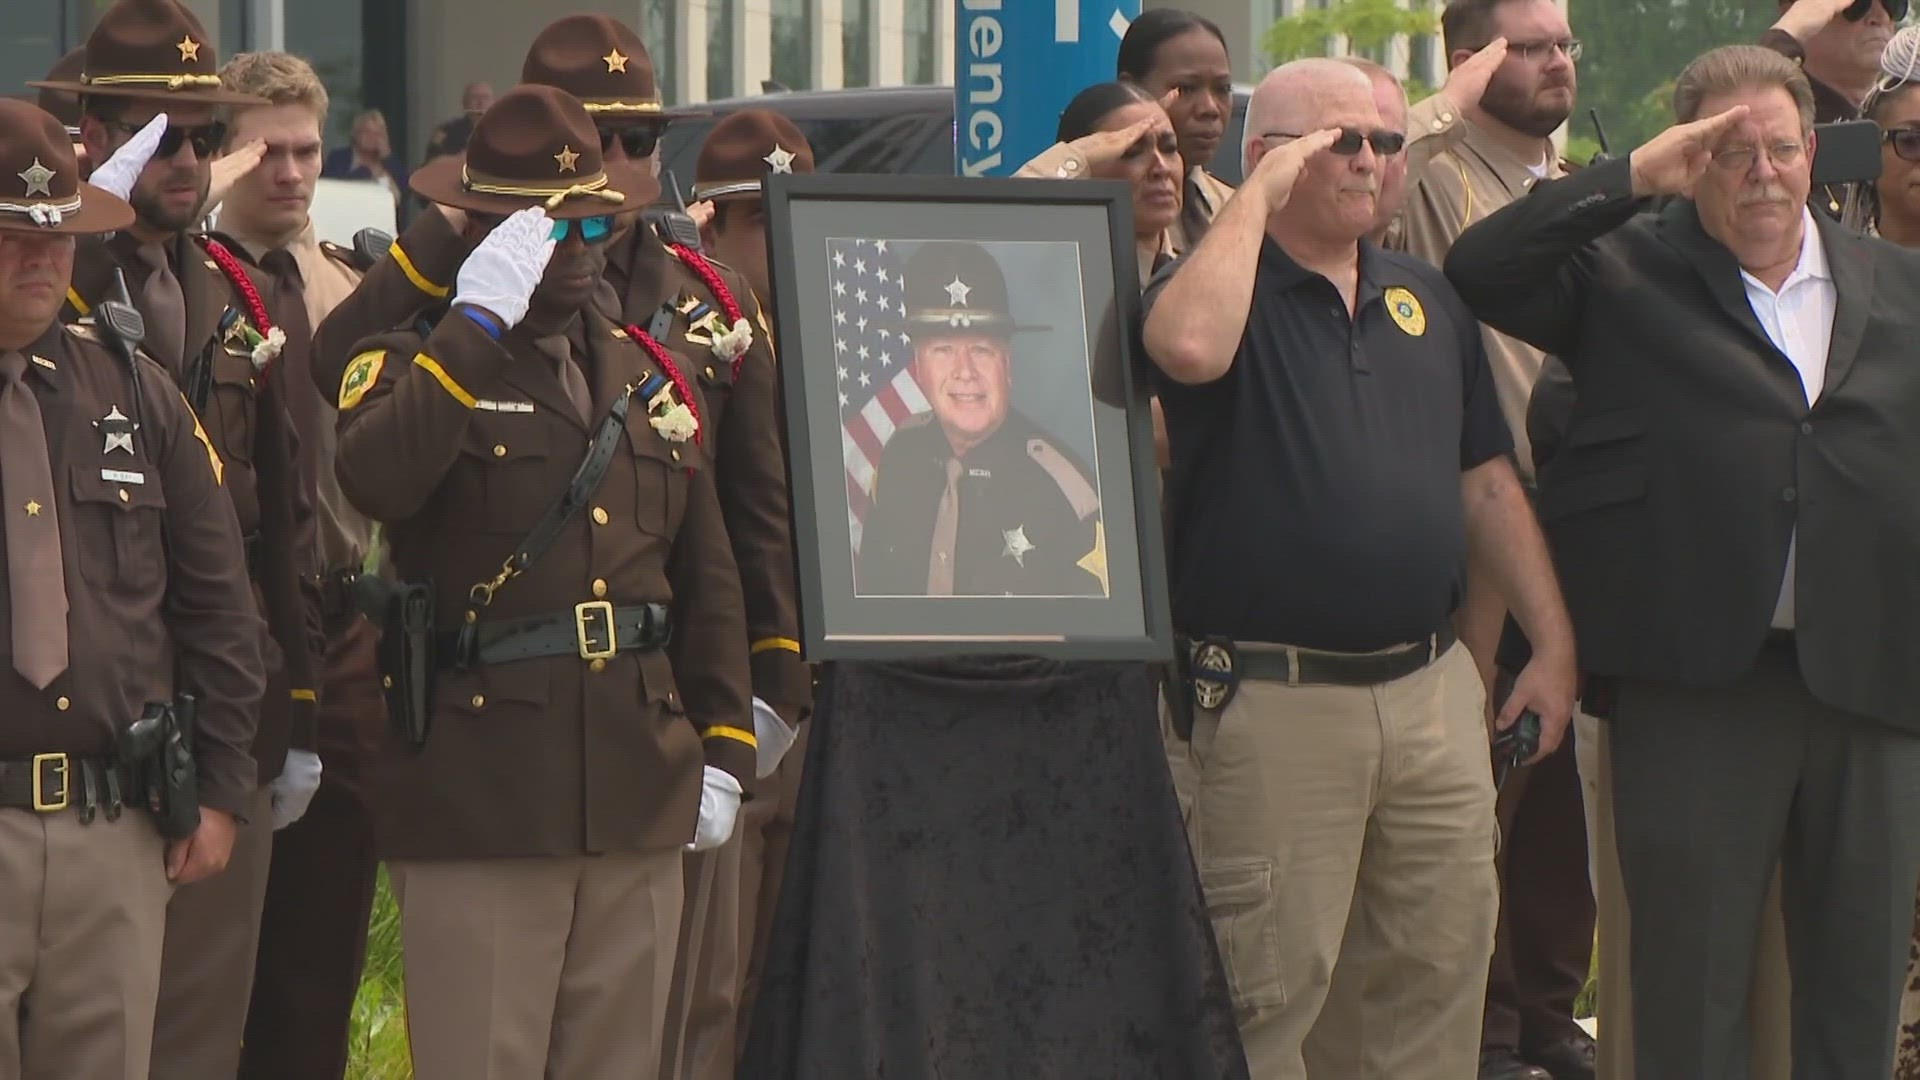 Deputy John Durm was honored for his life of service and nearly 40 years of commitment to the Indianapolis community on July 17, 2023.